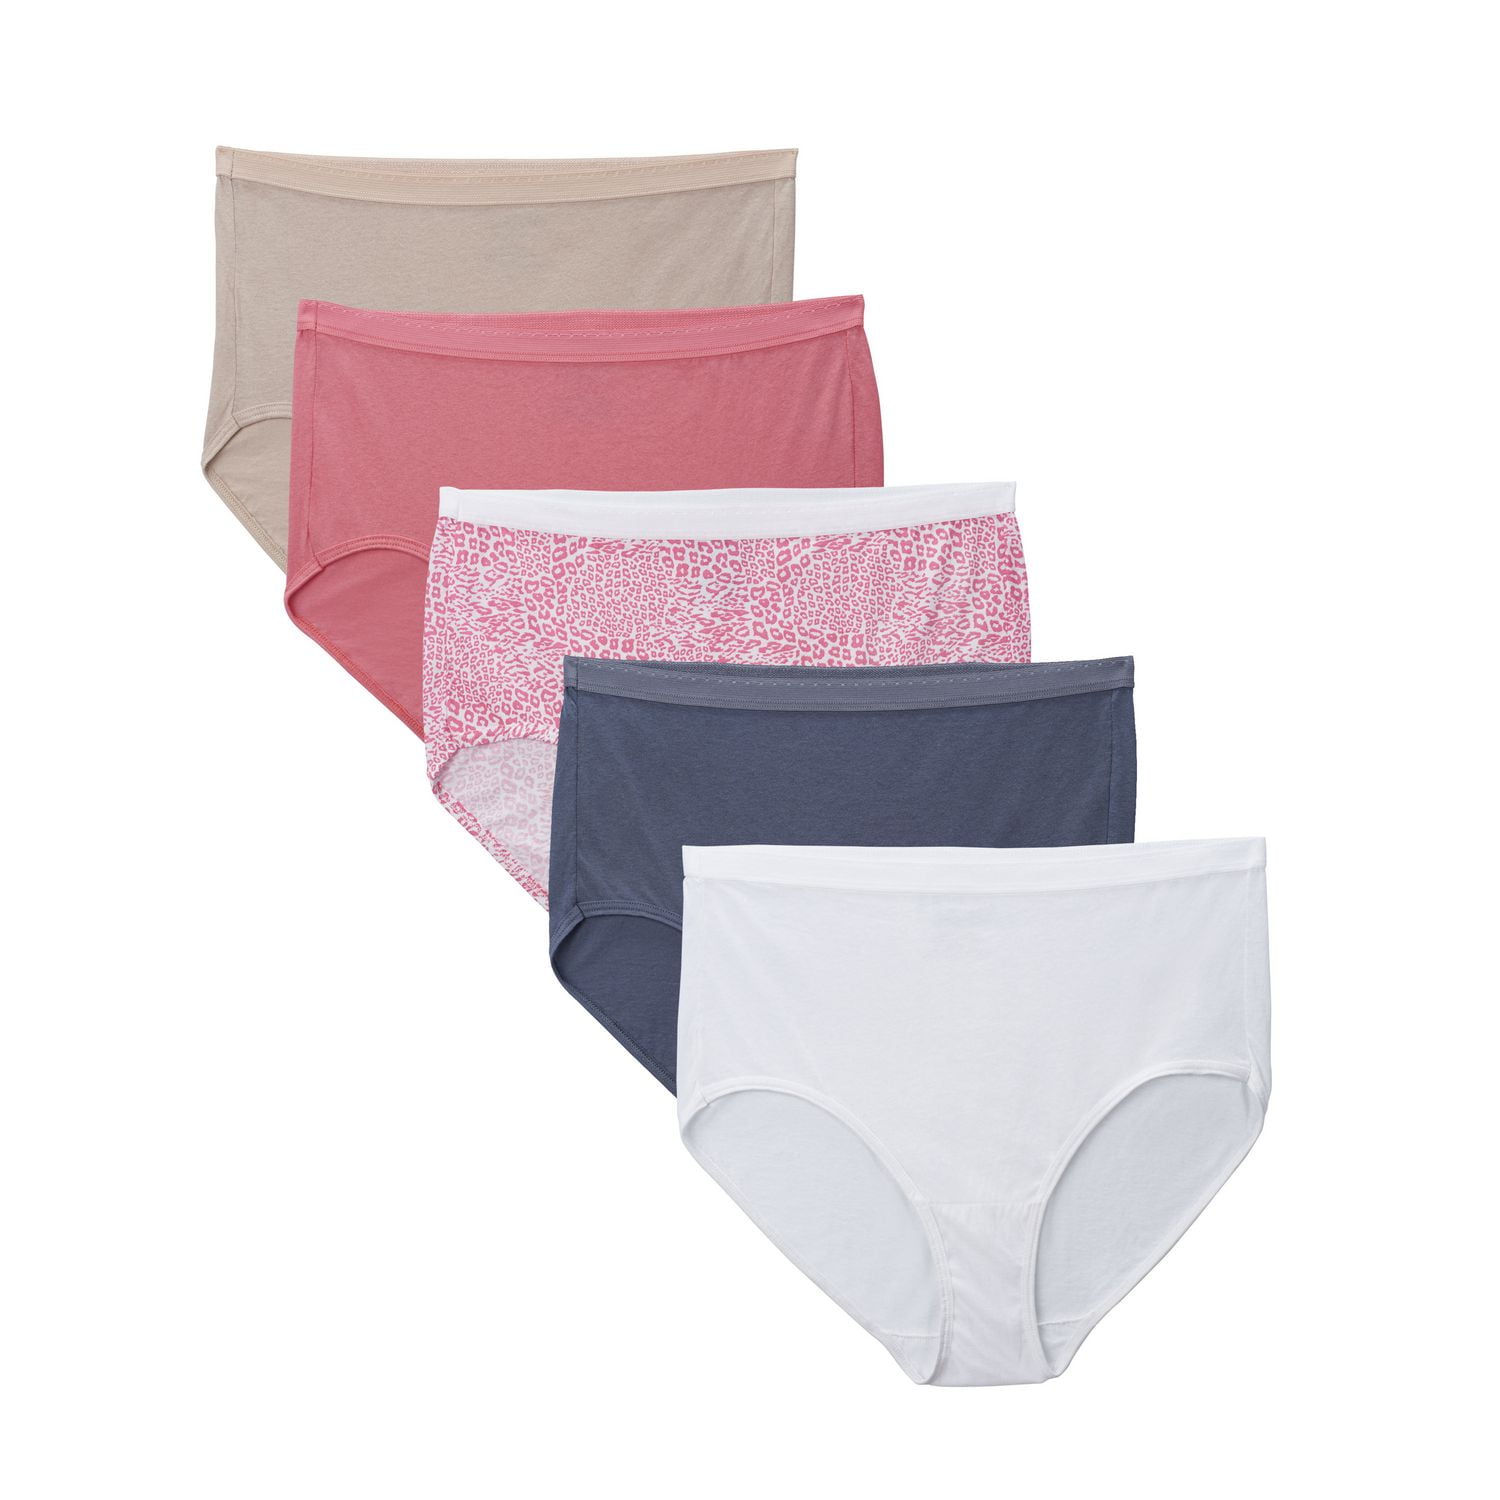 Fruit of the Loom Women's Cotton Brief, 5-Pack 